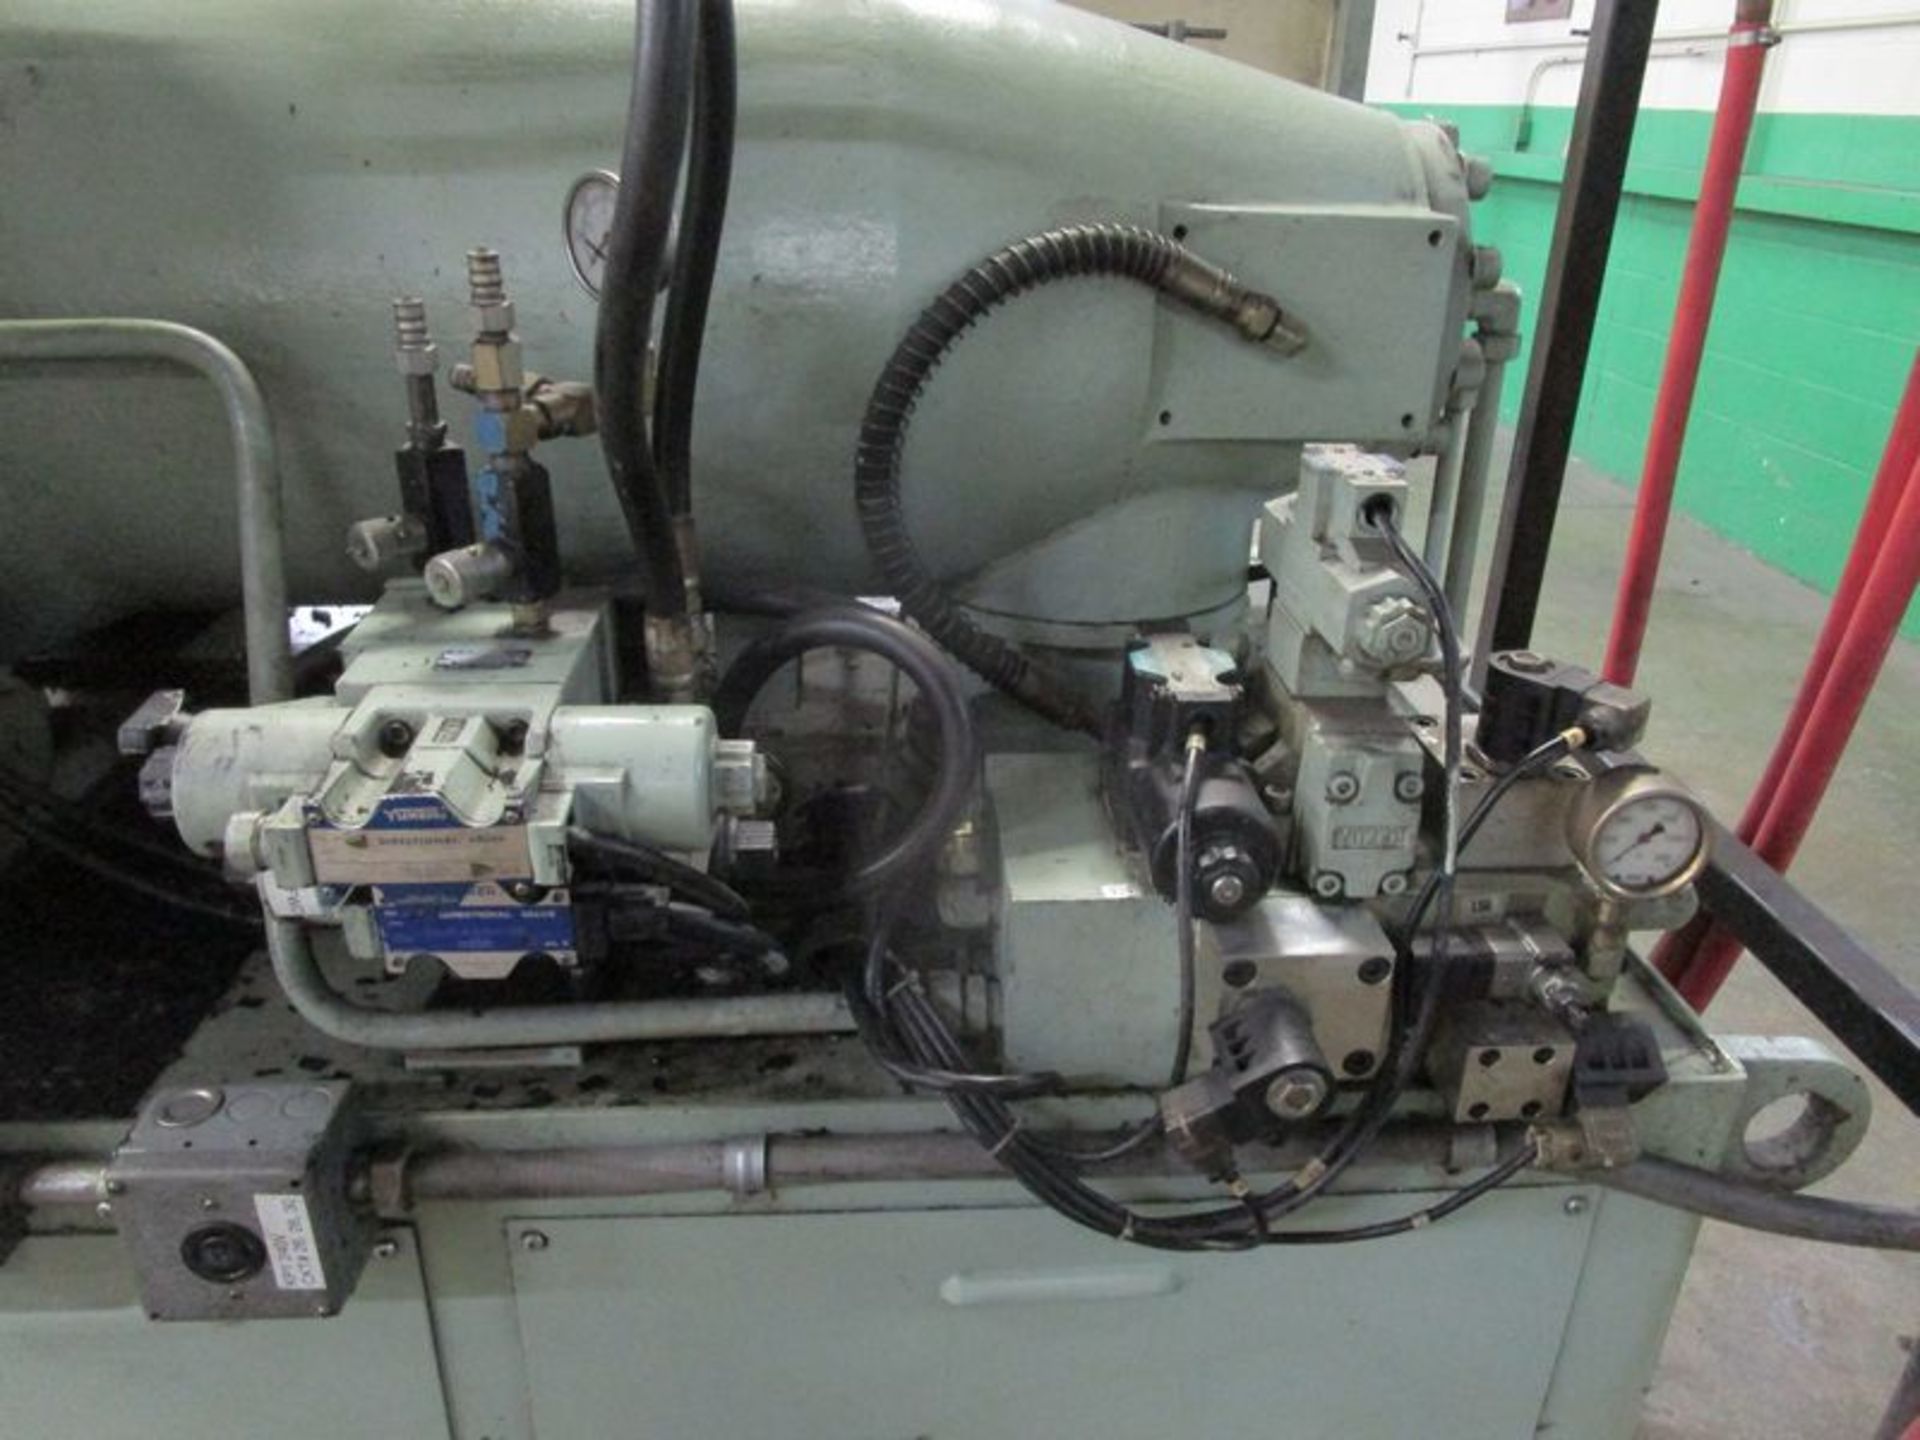 Nissin NC-145-FX2C 145-Ton Plastic Injection Molding Machine, S/N 95-145-13, 1995 - Image 7 of 9